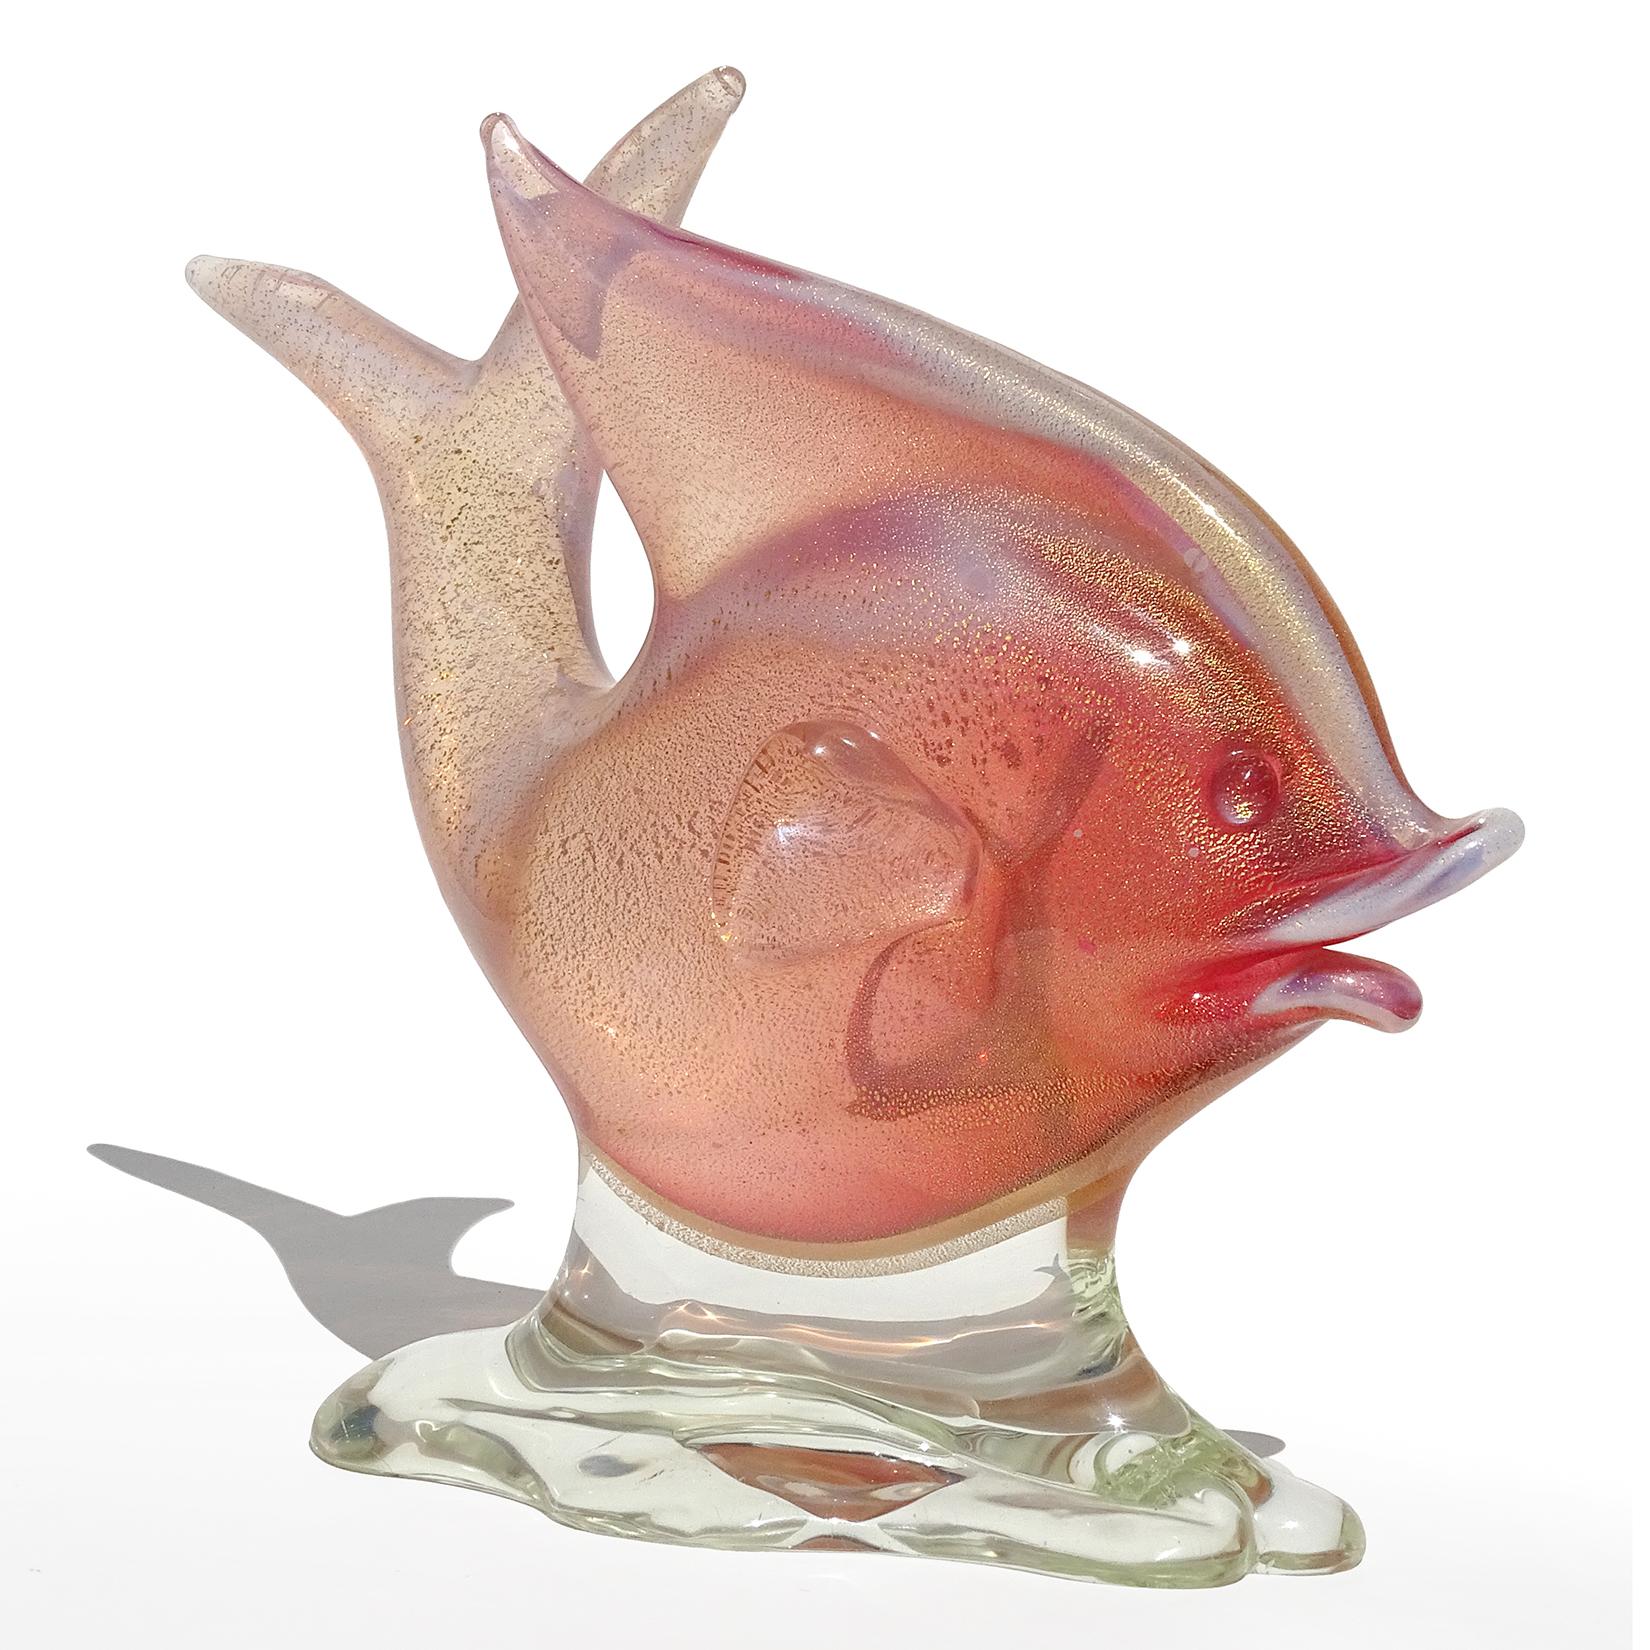 Beautiful vintage Murano hand blown Sommerso pink, opal and gold flecks Italian art glass fish on clear pedestal sculpture. Documented to designer Archimede Seguso, circa 1950s. The opalescent glass creates an outline around the fish. Nicely